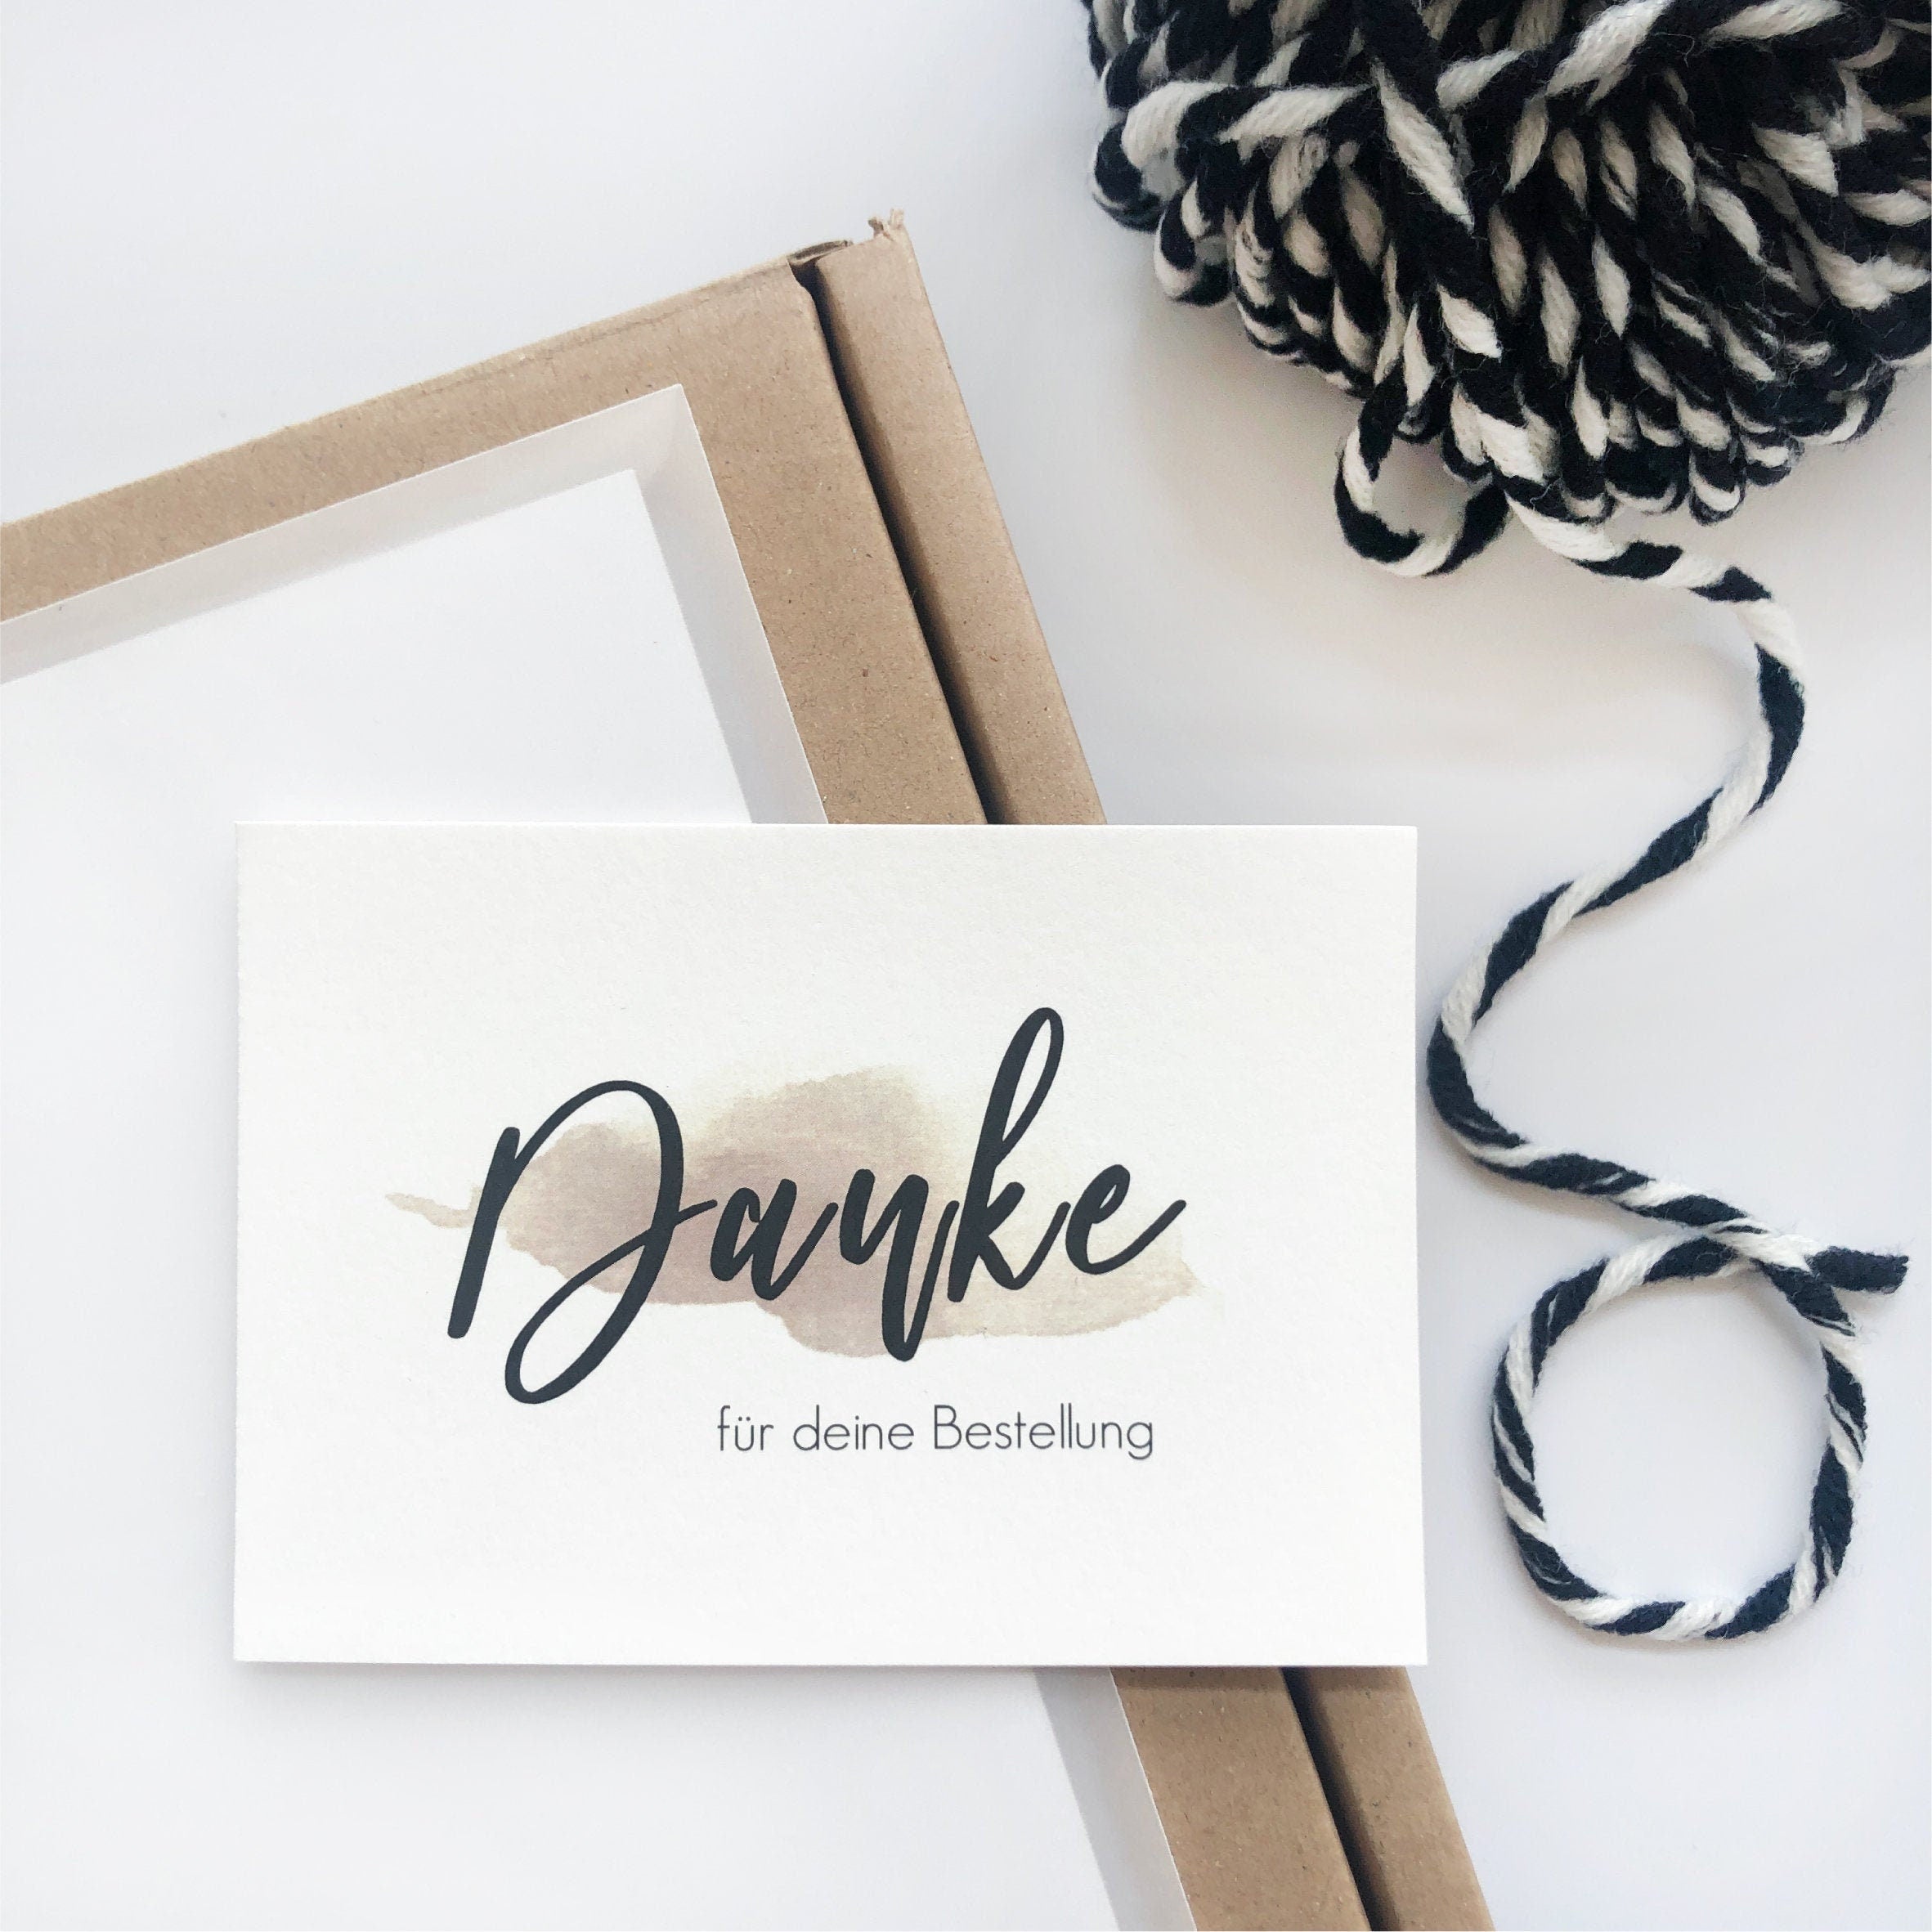 Mini Card - Thank you for your order | customer gift | packaging design